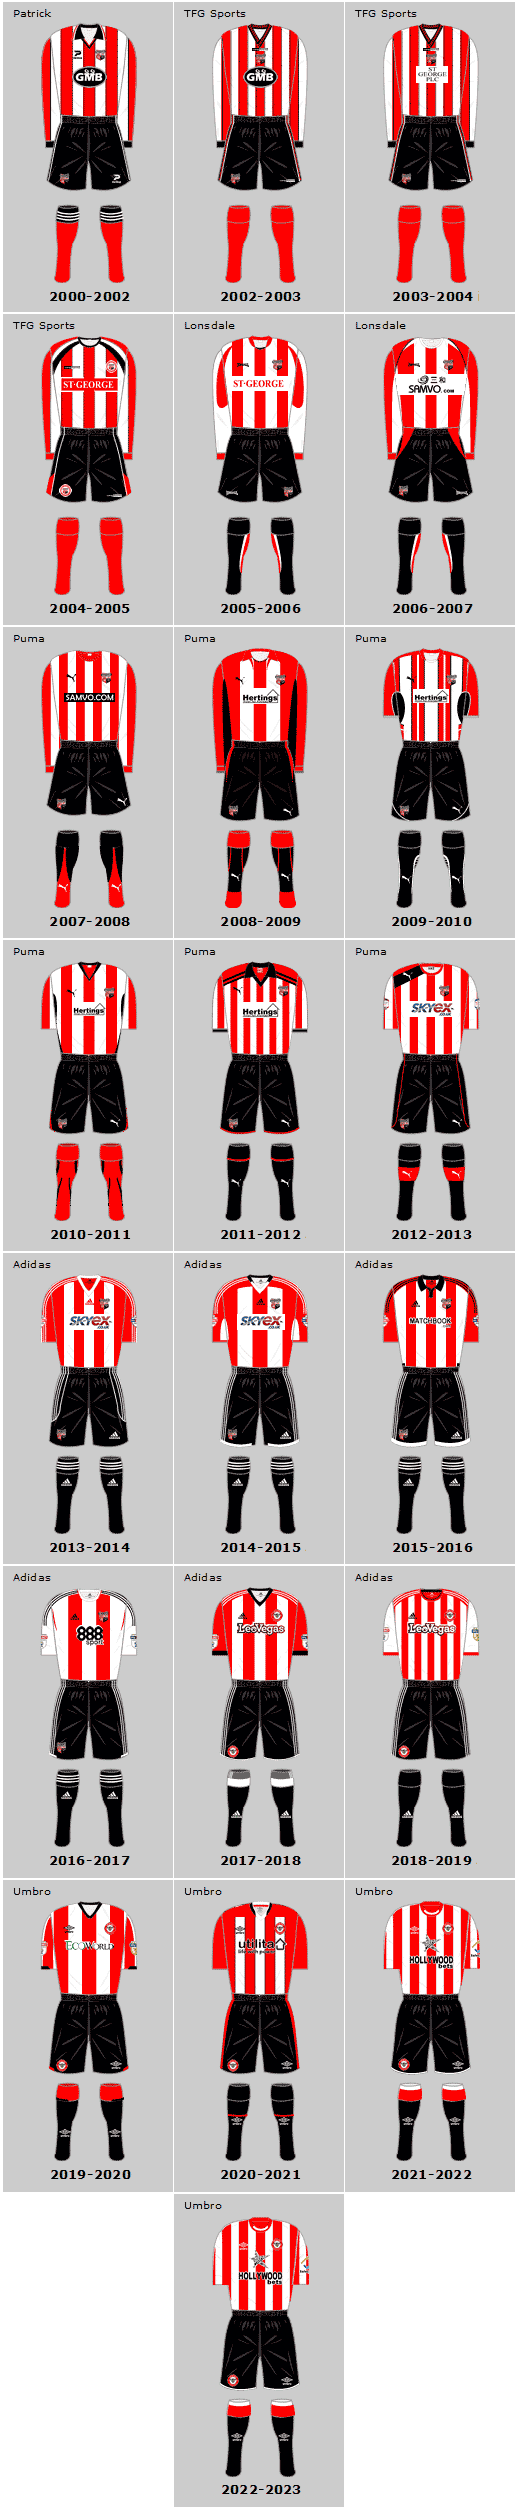 Brentford FC 21st Century Home Playing Kits